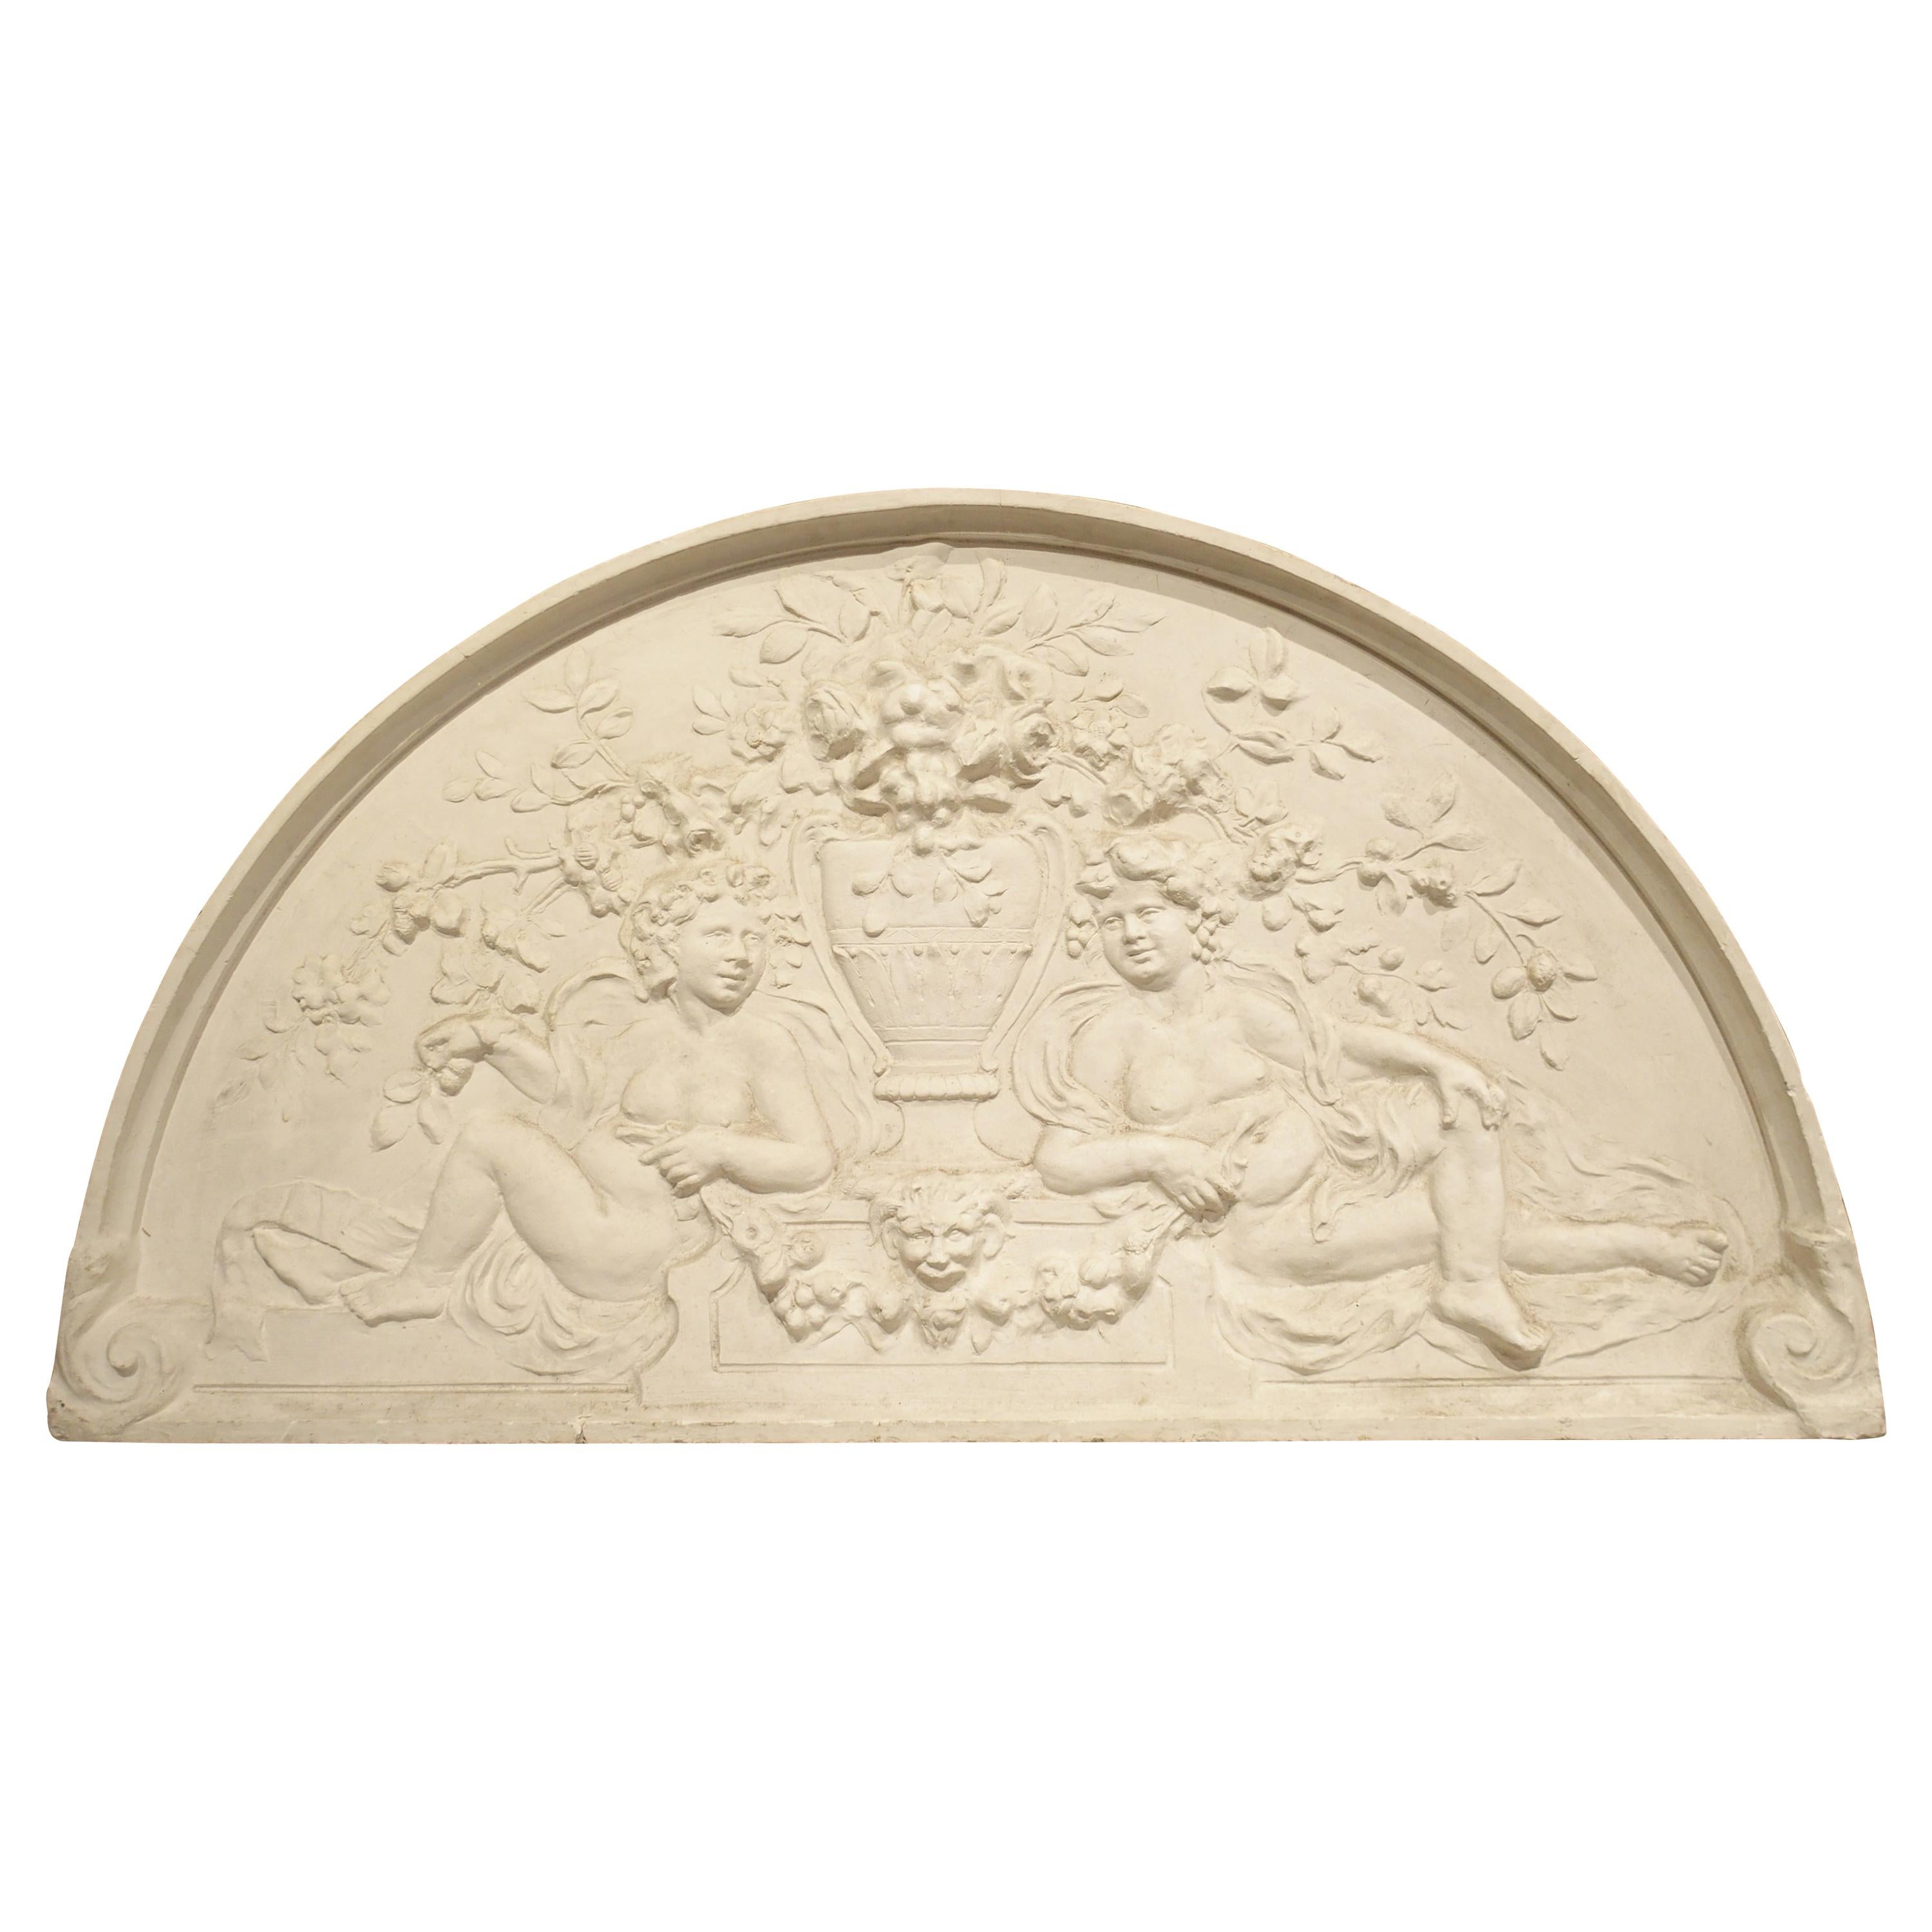 Large Arched Plaster Bas Relief Overdoor from France